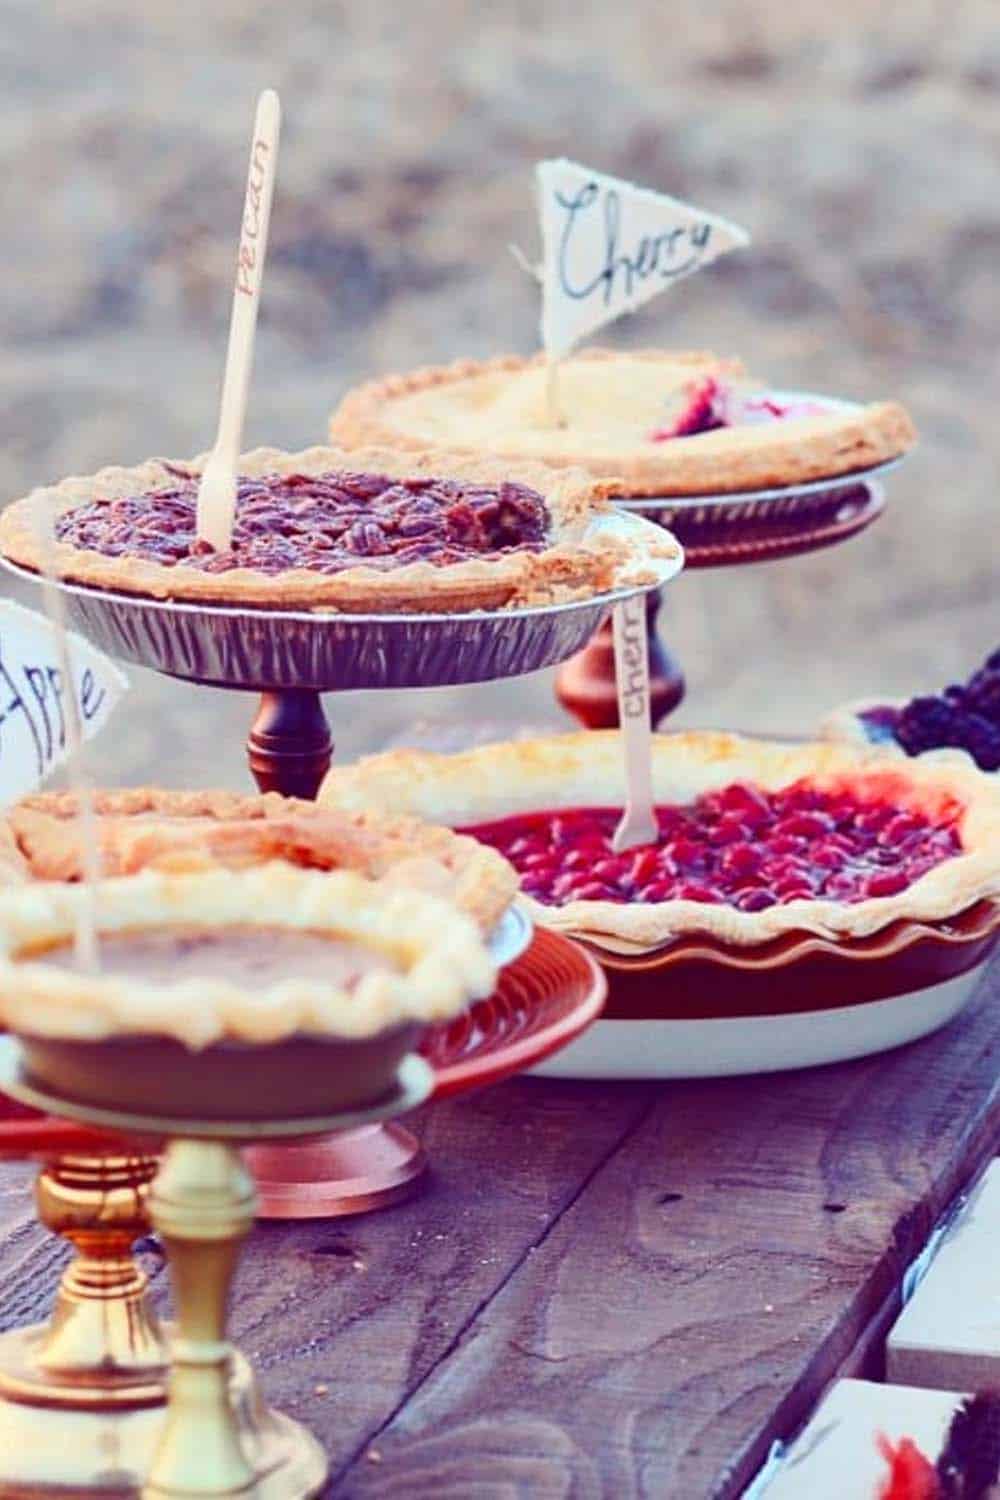 https://thoughtfullysimple.com/wp-content/uploads/2013/12/pie-party-pin.jpg